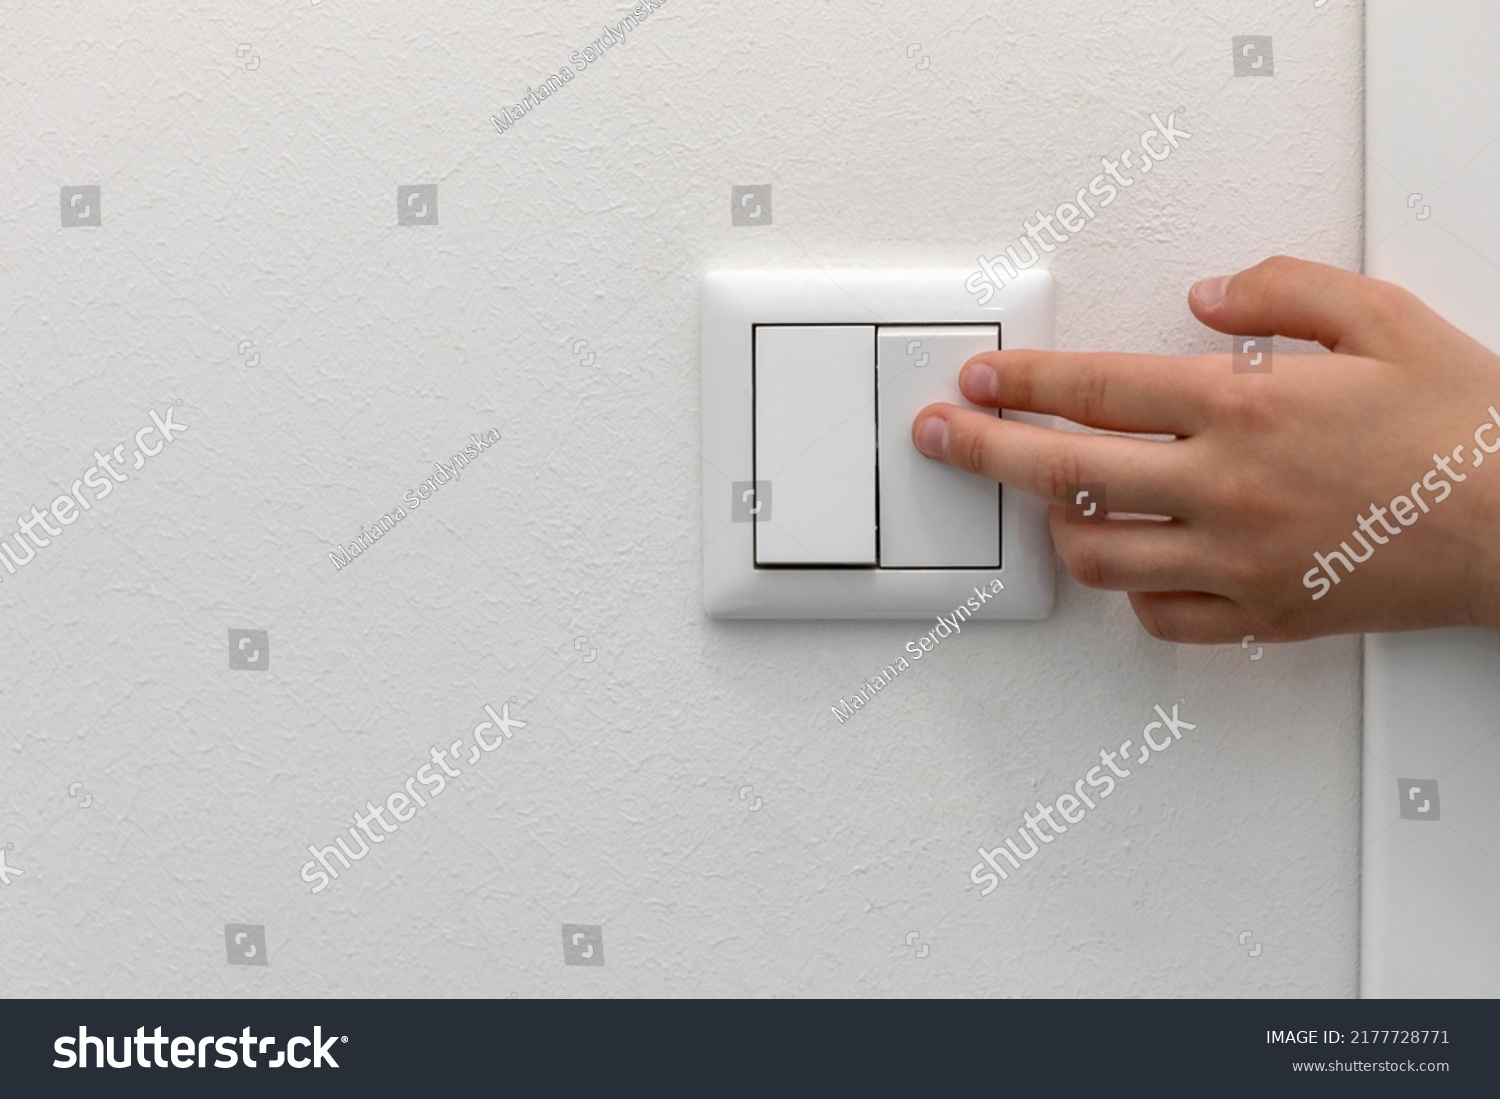 Switching Off the Light, Turning Off Light Switch. Saving concept. Copy space.  #2177728771